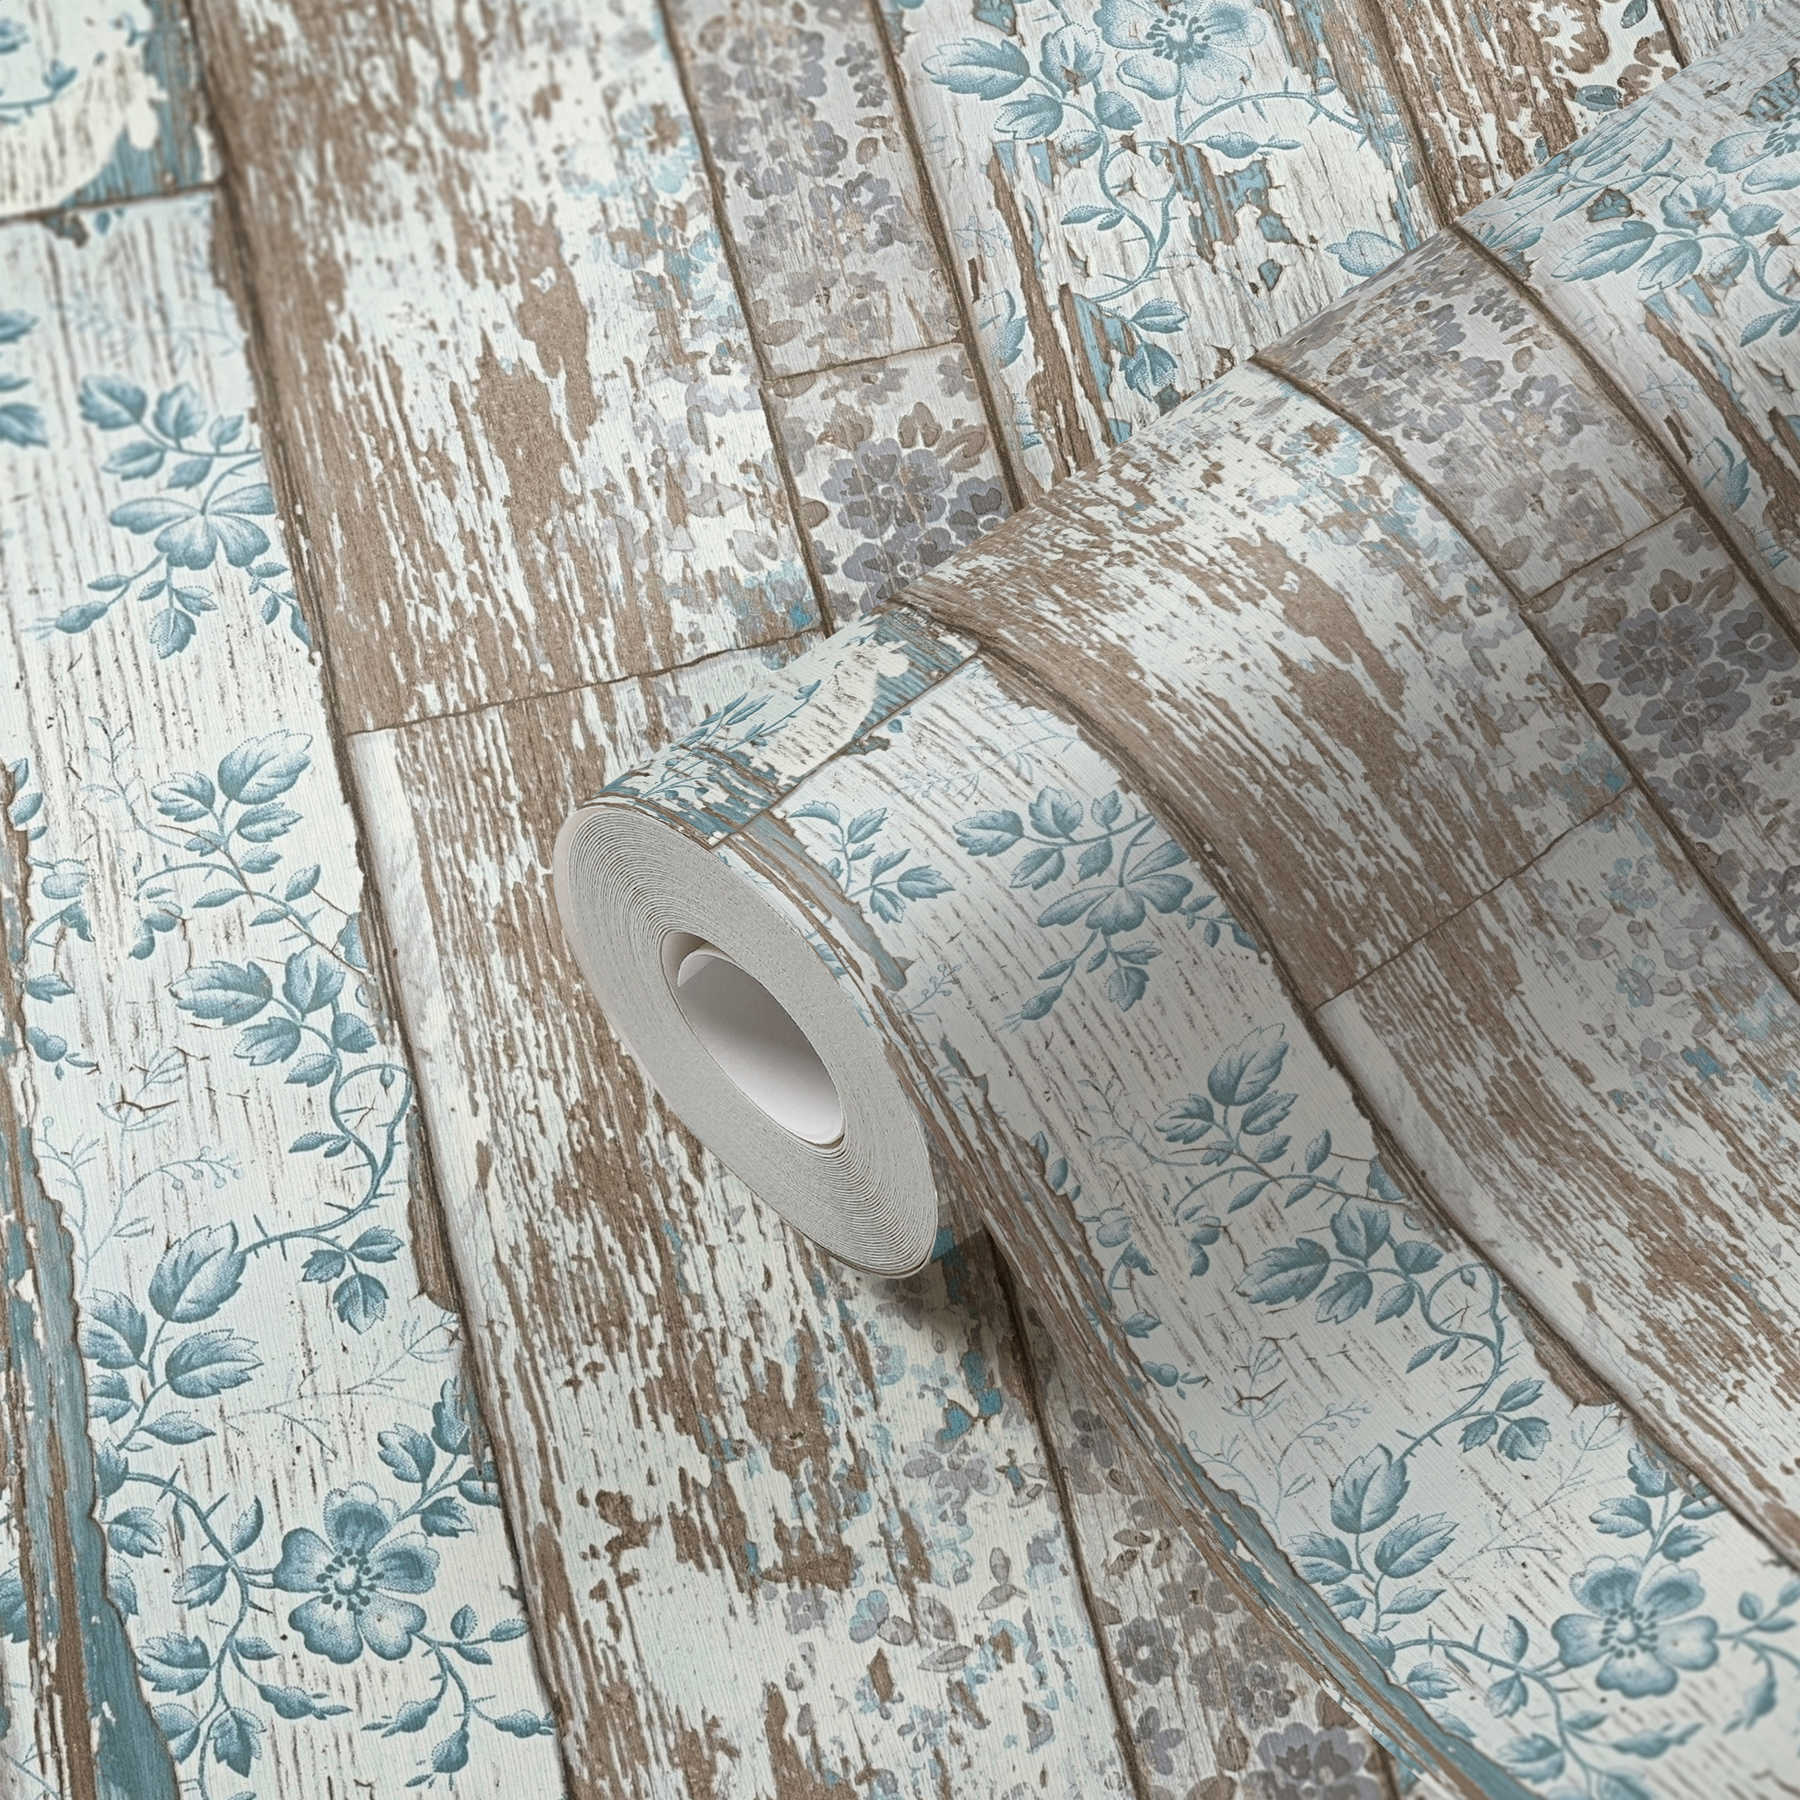             Country house wallpaper plank look with vintage floral print - blue, brown, grey
        